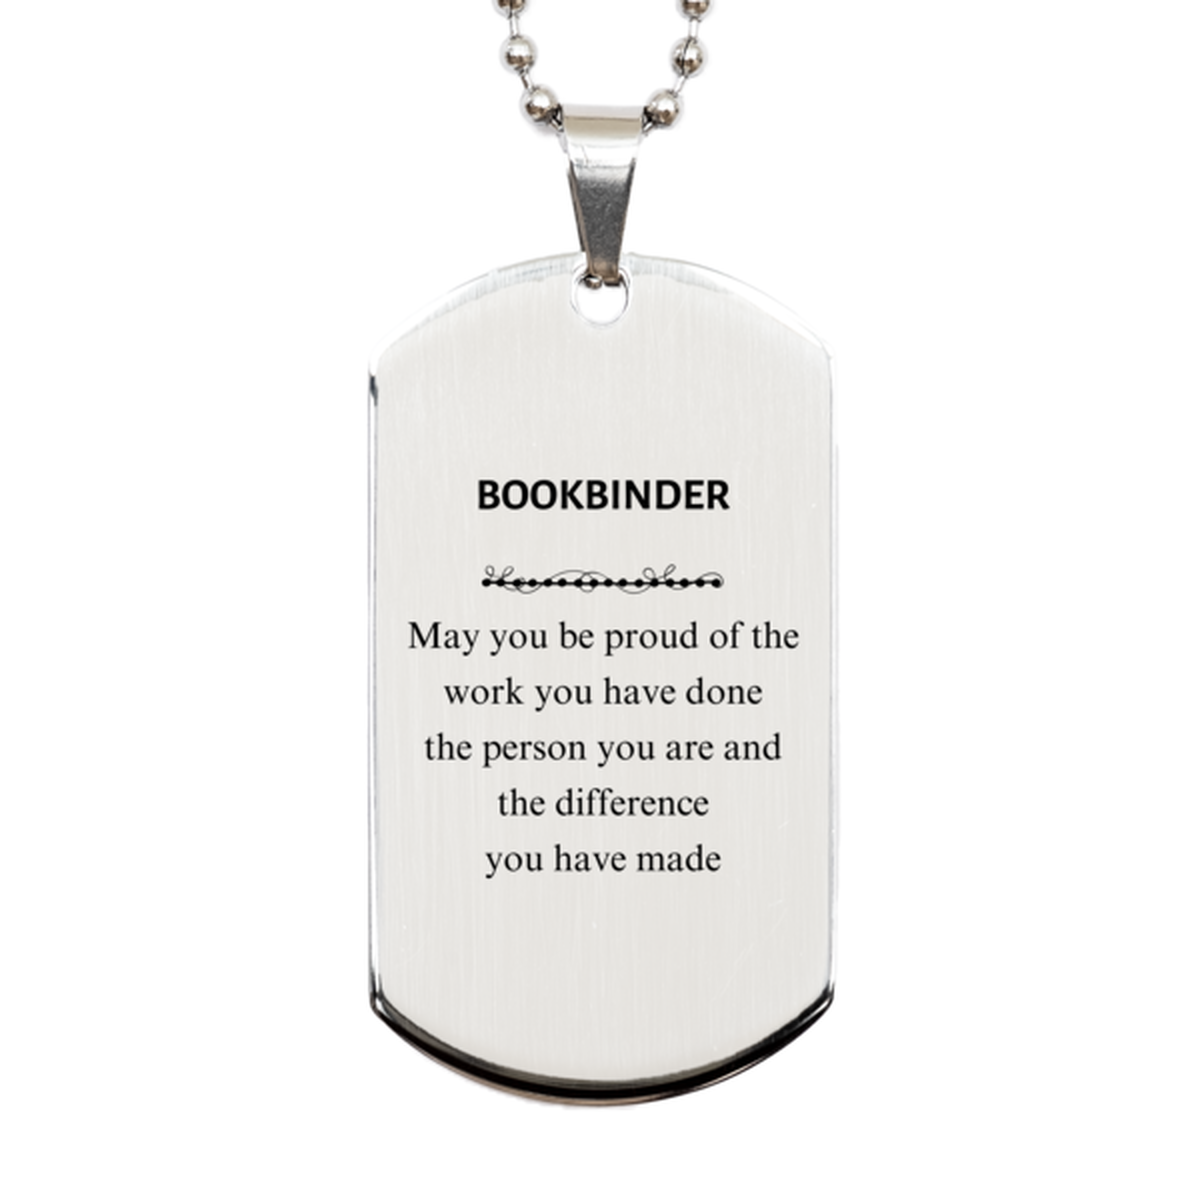 Bookbinder May you be proud of the work you have done, Retirement Bookbinder Silver Dog Tag for Colleague Appreciation Gifts Amazing for Bookbinder